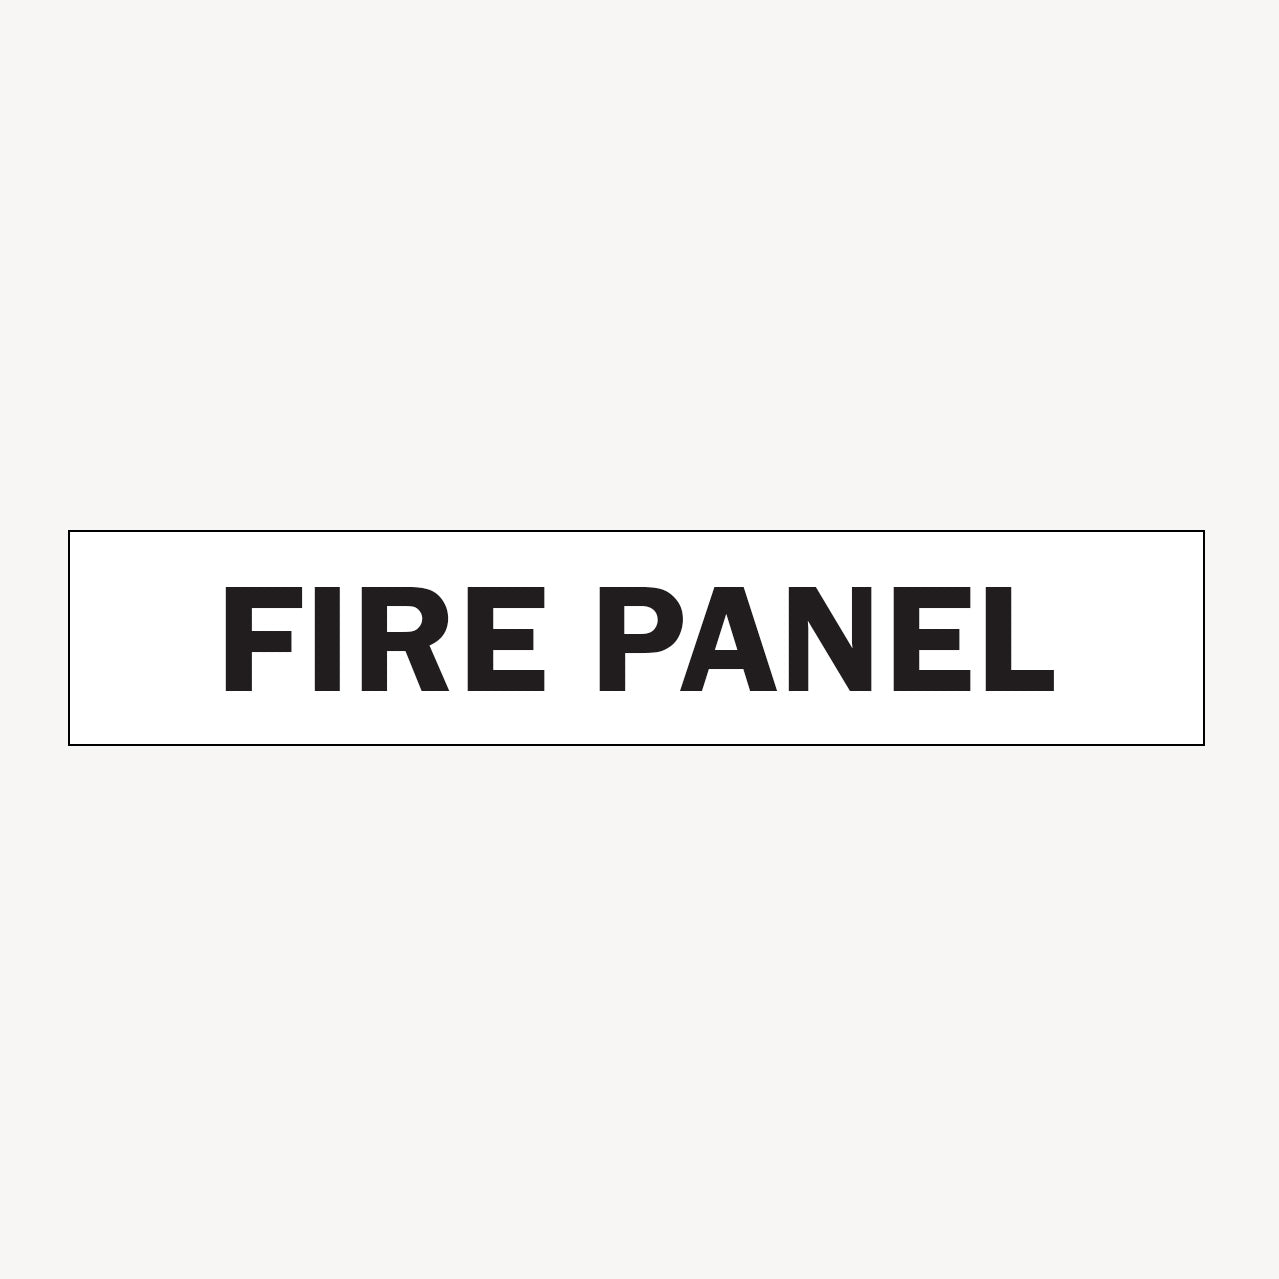 Buy Fire Signs in Australia - FIRE PANEL SIGN